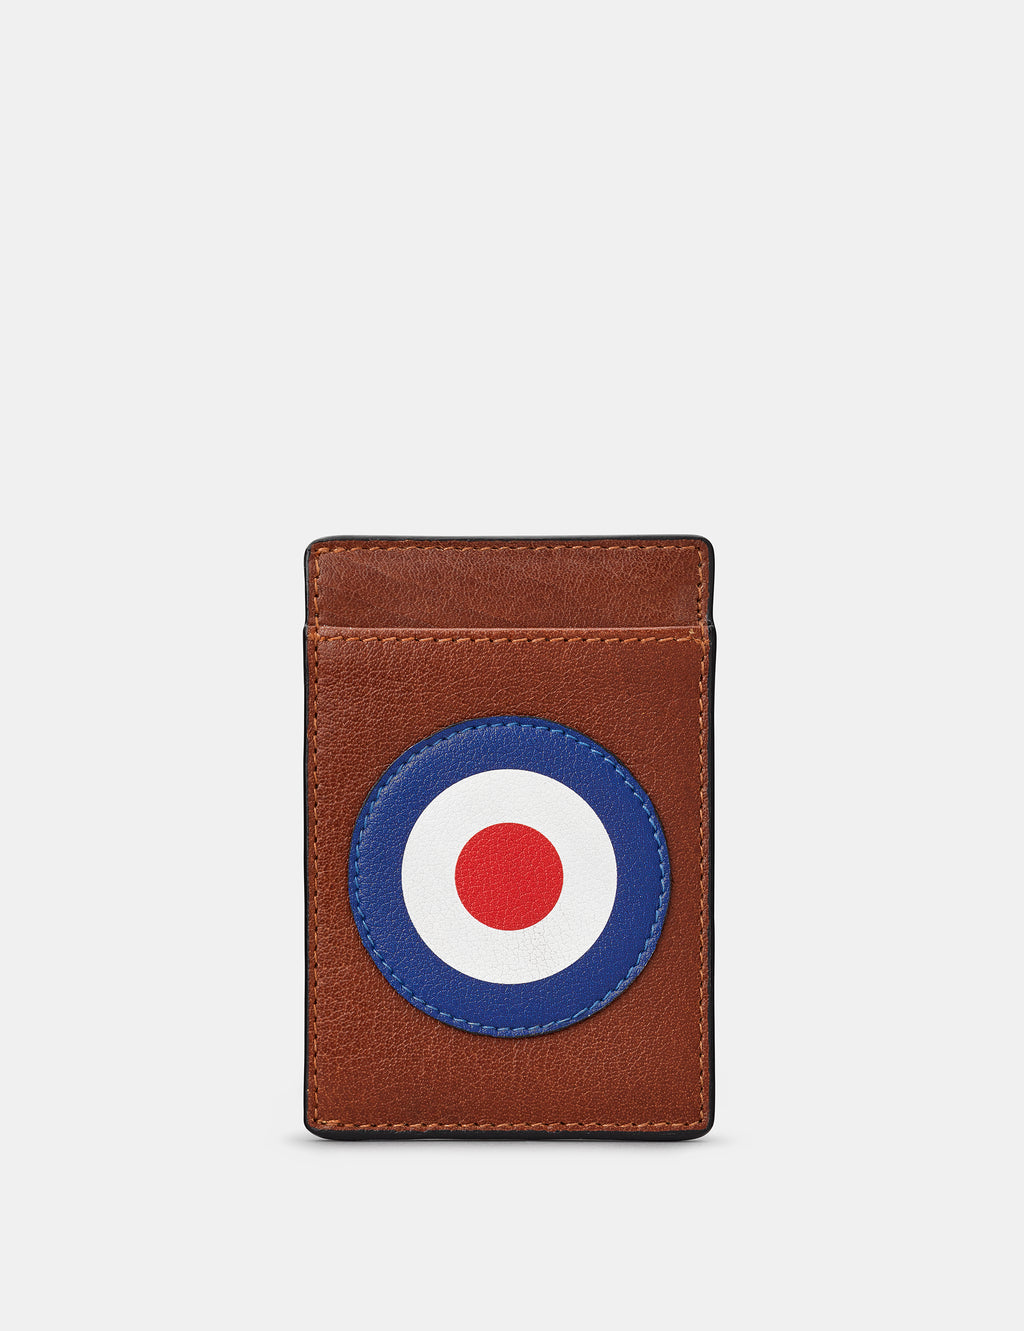 Mod Compact Leather Card Holder